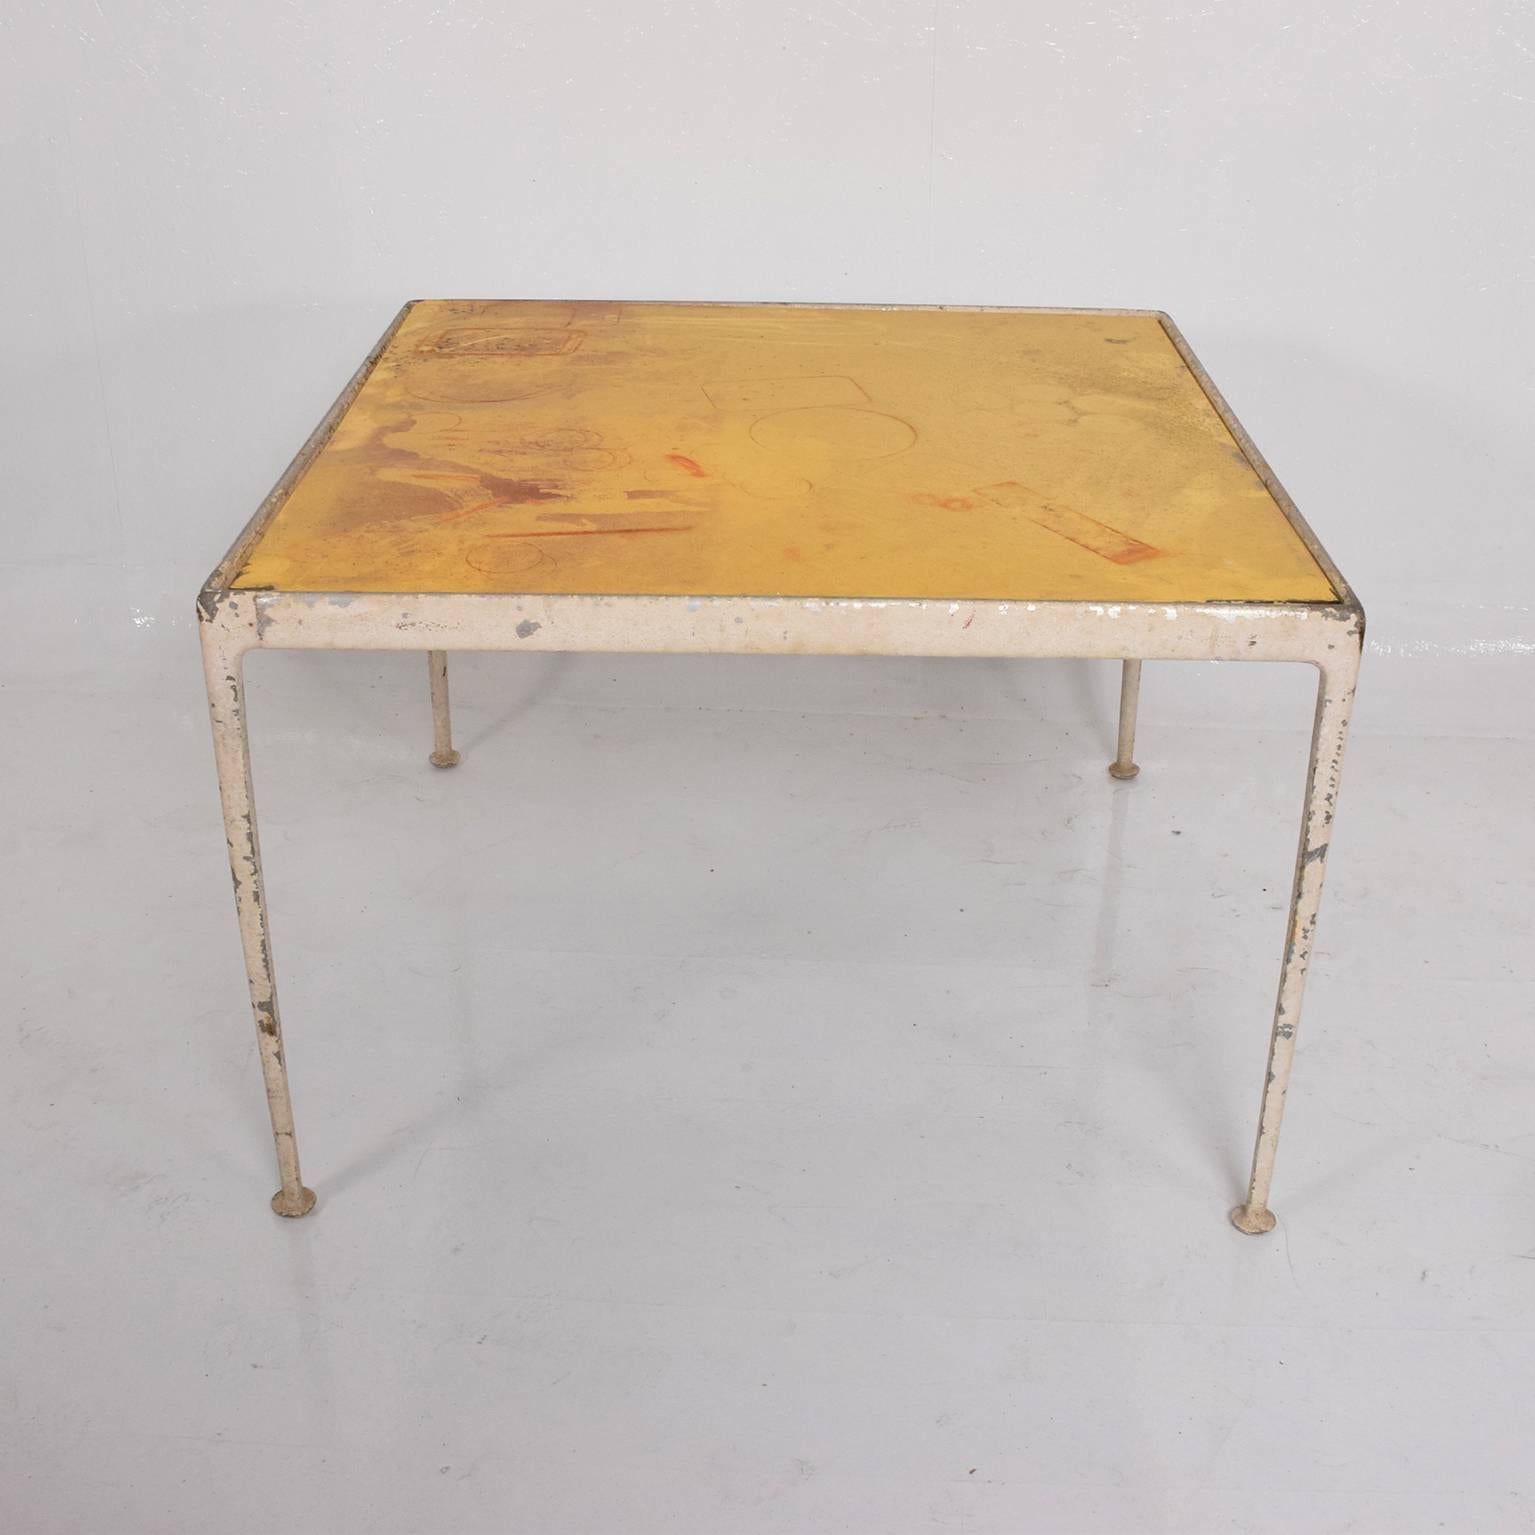 For your consideration a vintage table in the original vintage unrestored condition.
Table can be restored upon request for an additional fee. 

Original yellow and off-white color. 
Original Knoll label underneath tabletop. 
USA, circa